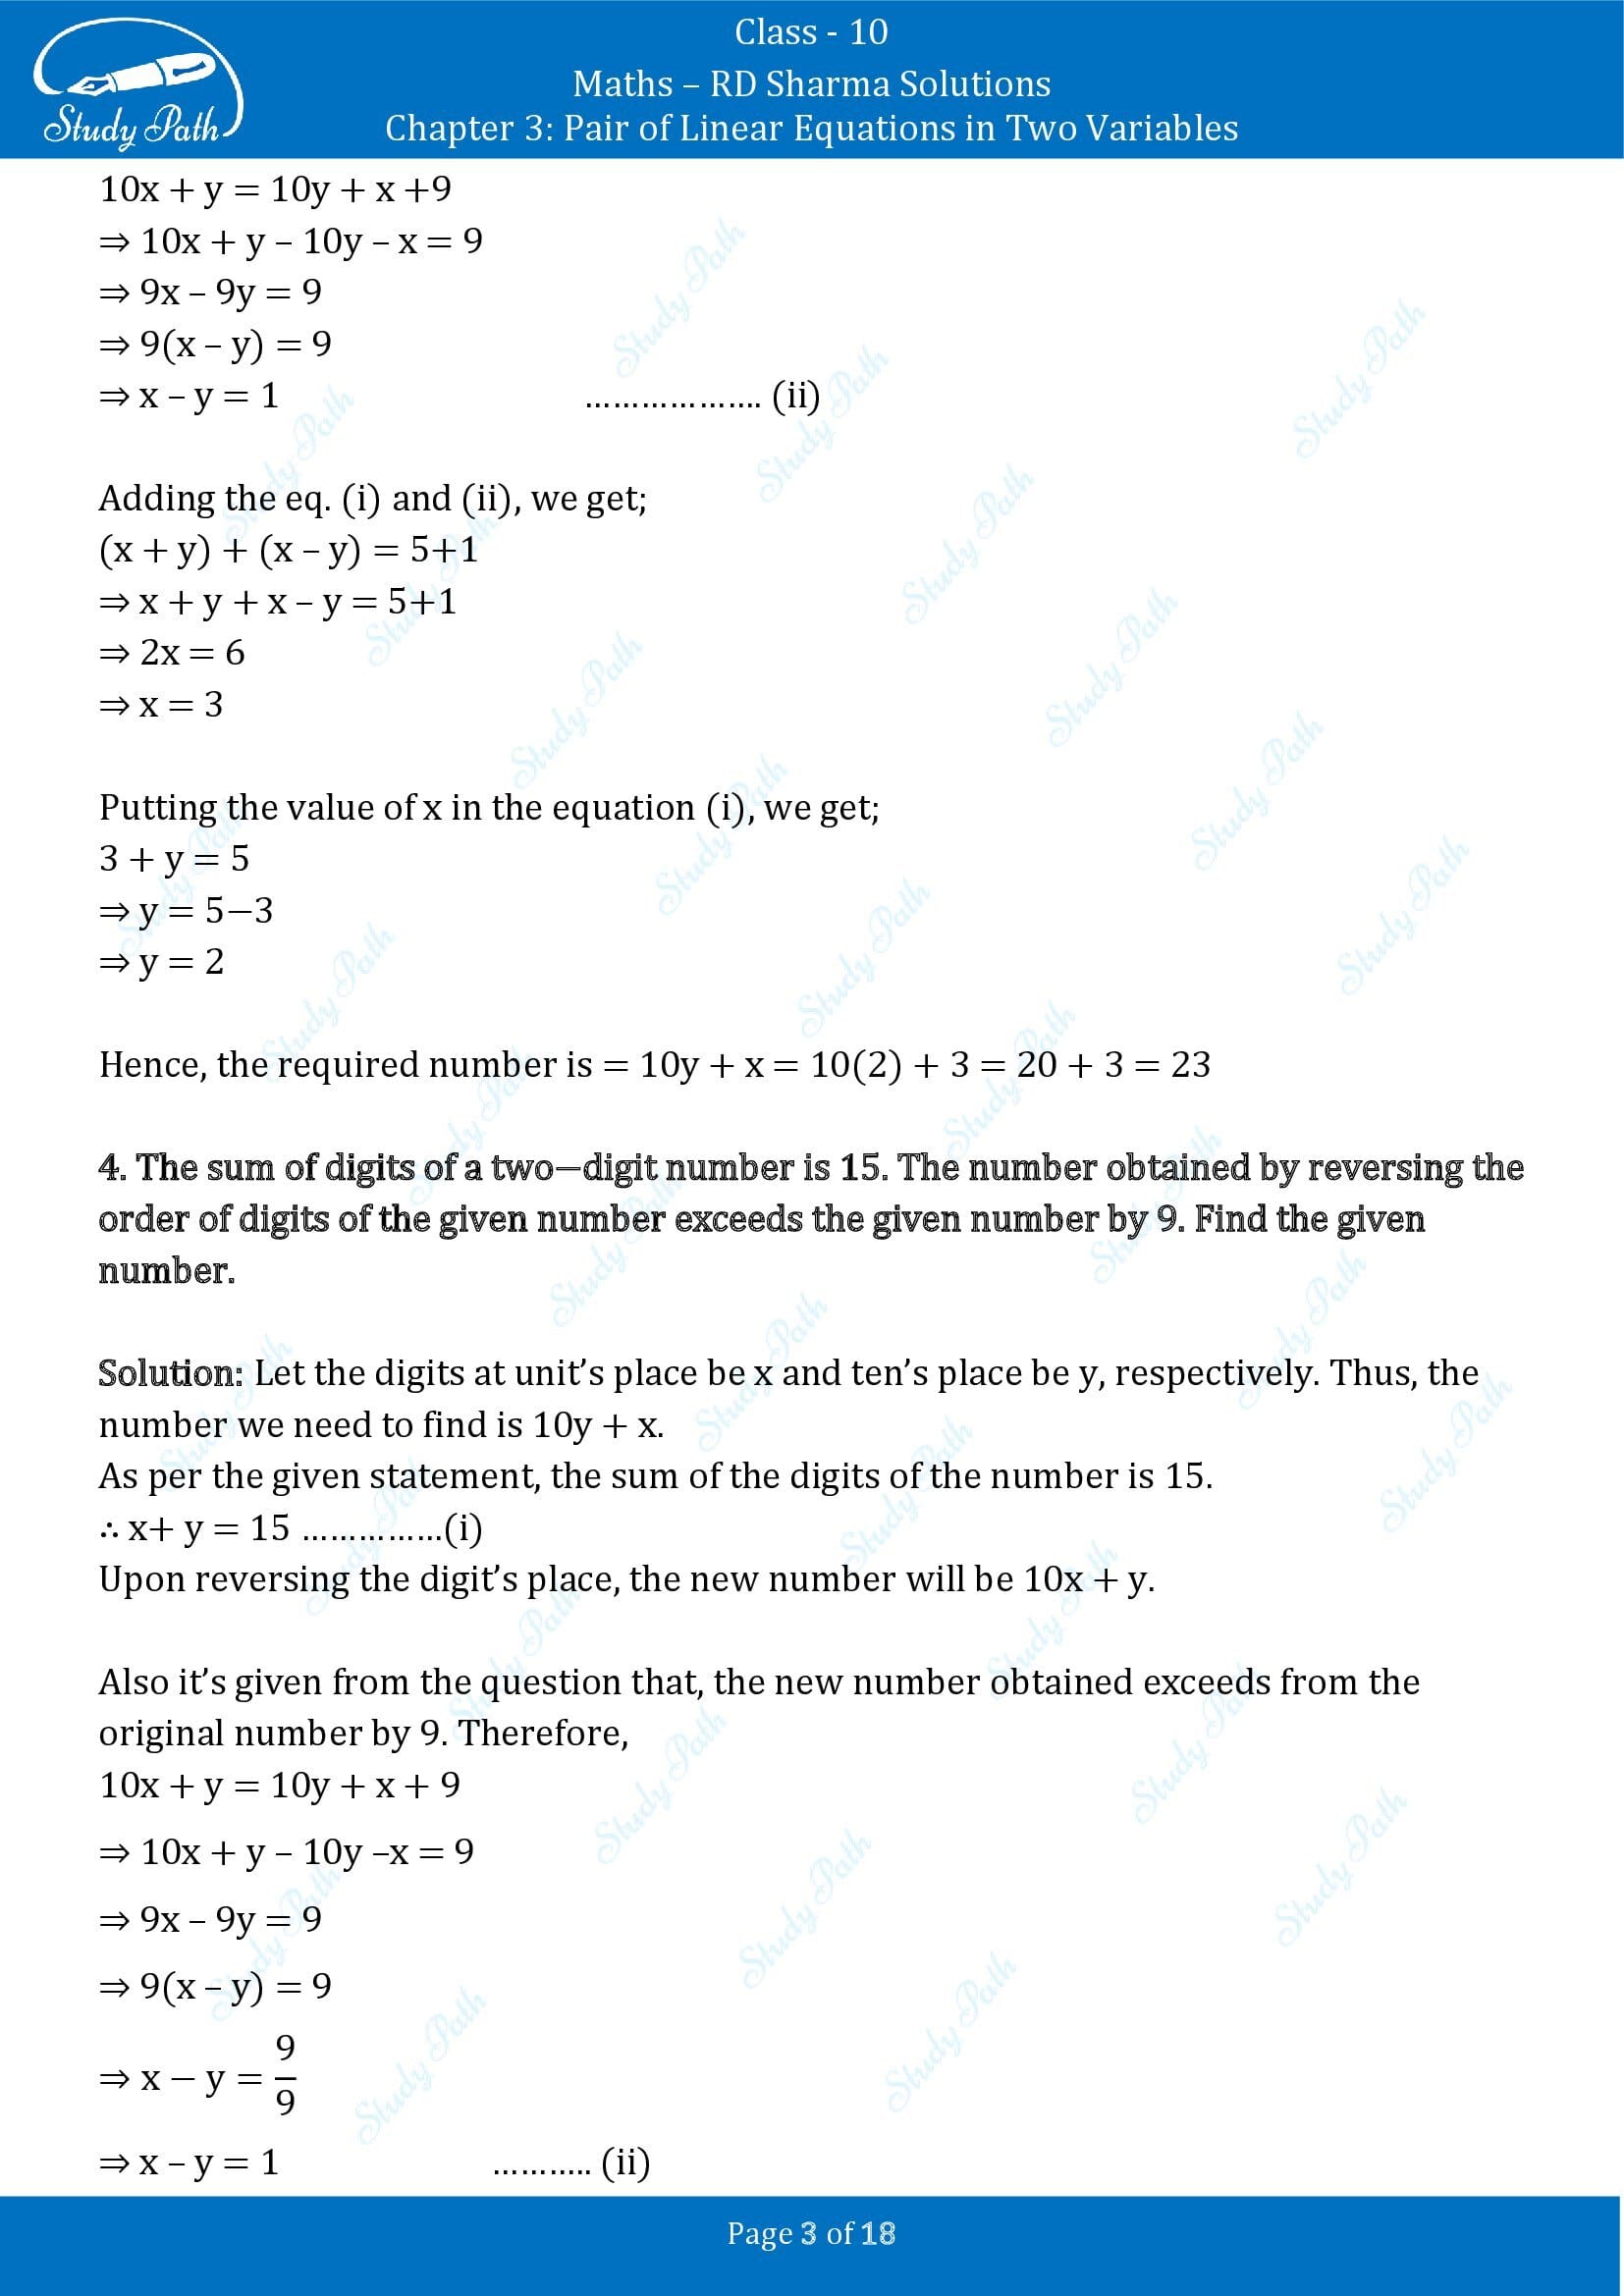 RD Sharma Solutions Class 10 Chapter 3 Pair of Linear Equations in Two Variables Exercise 3.7 00003